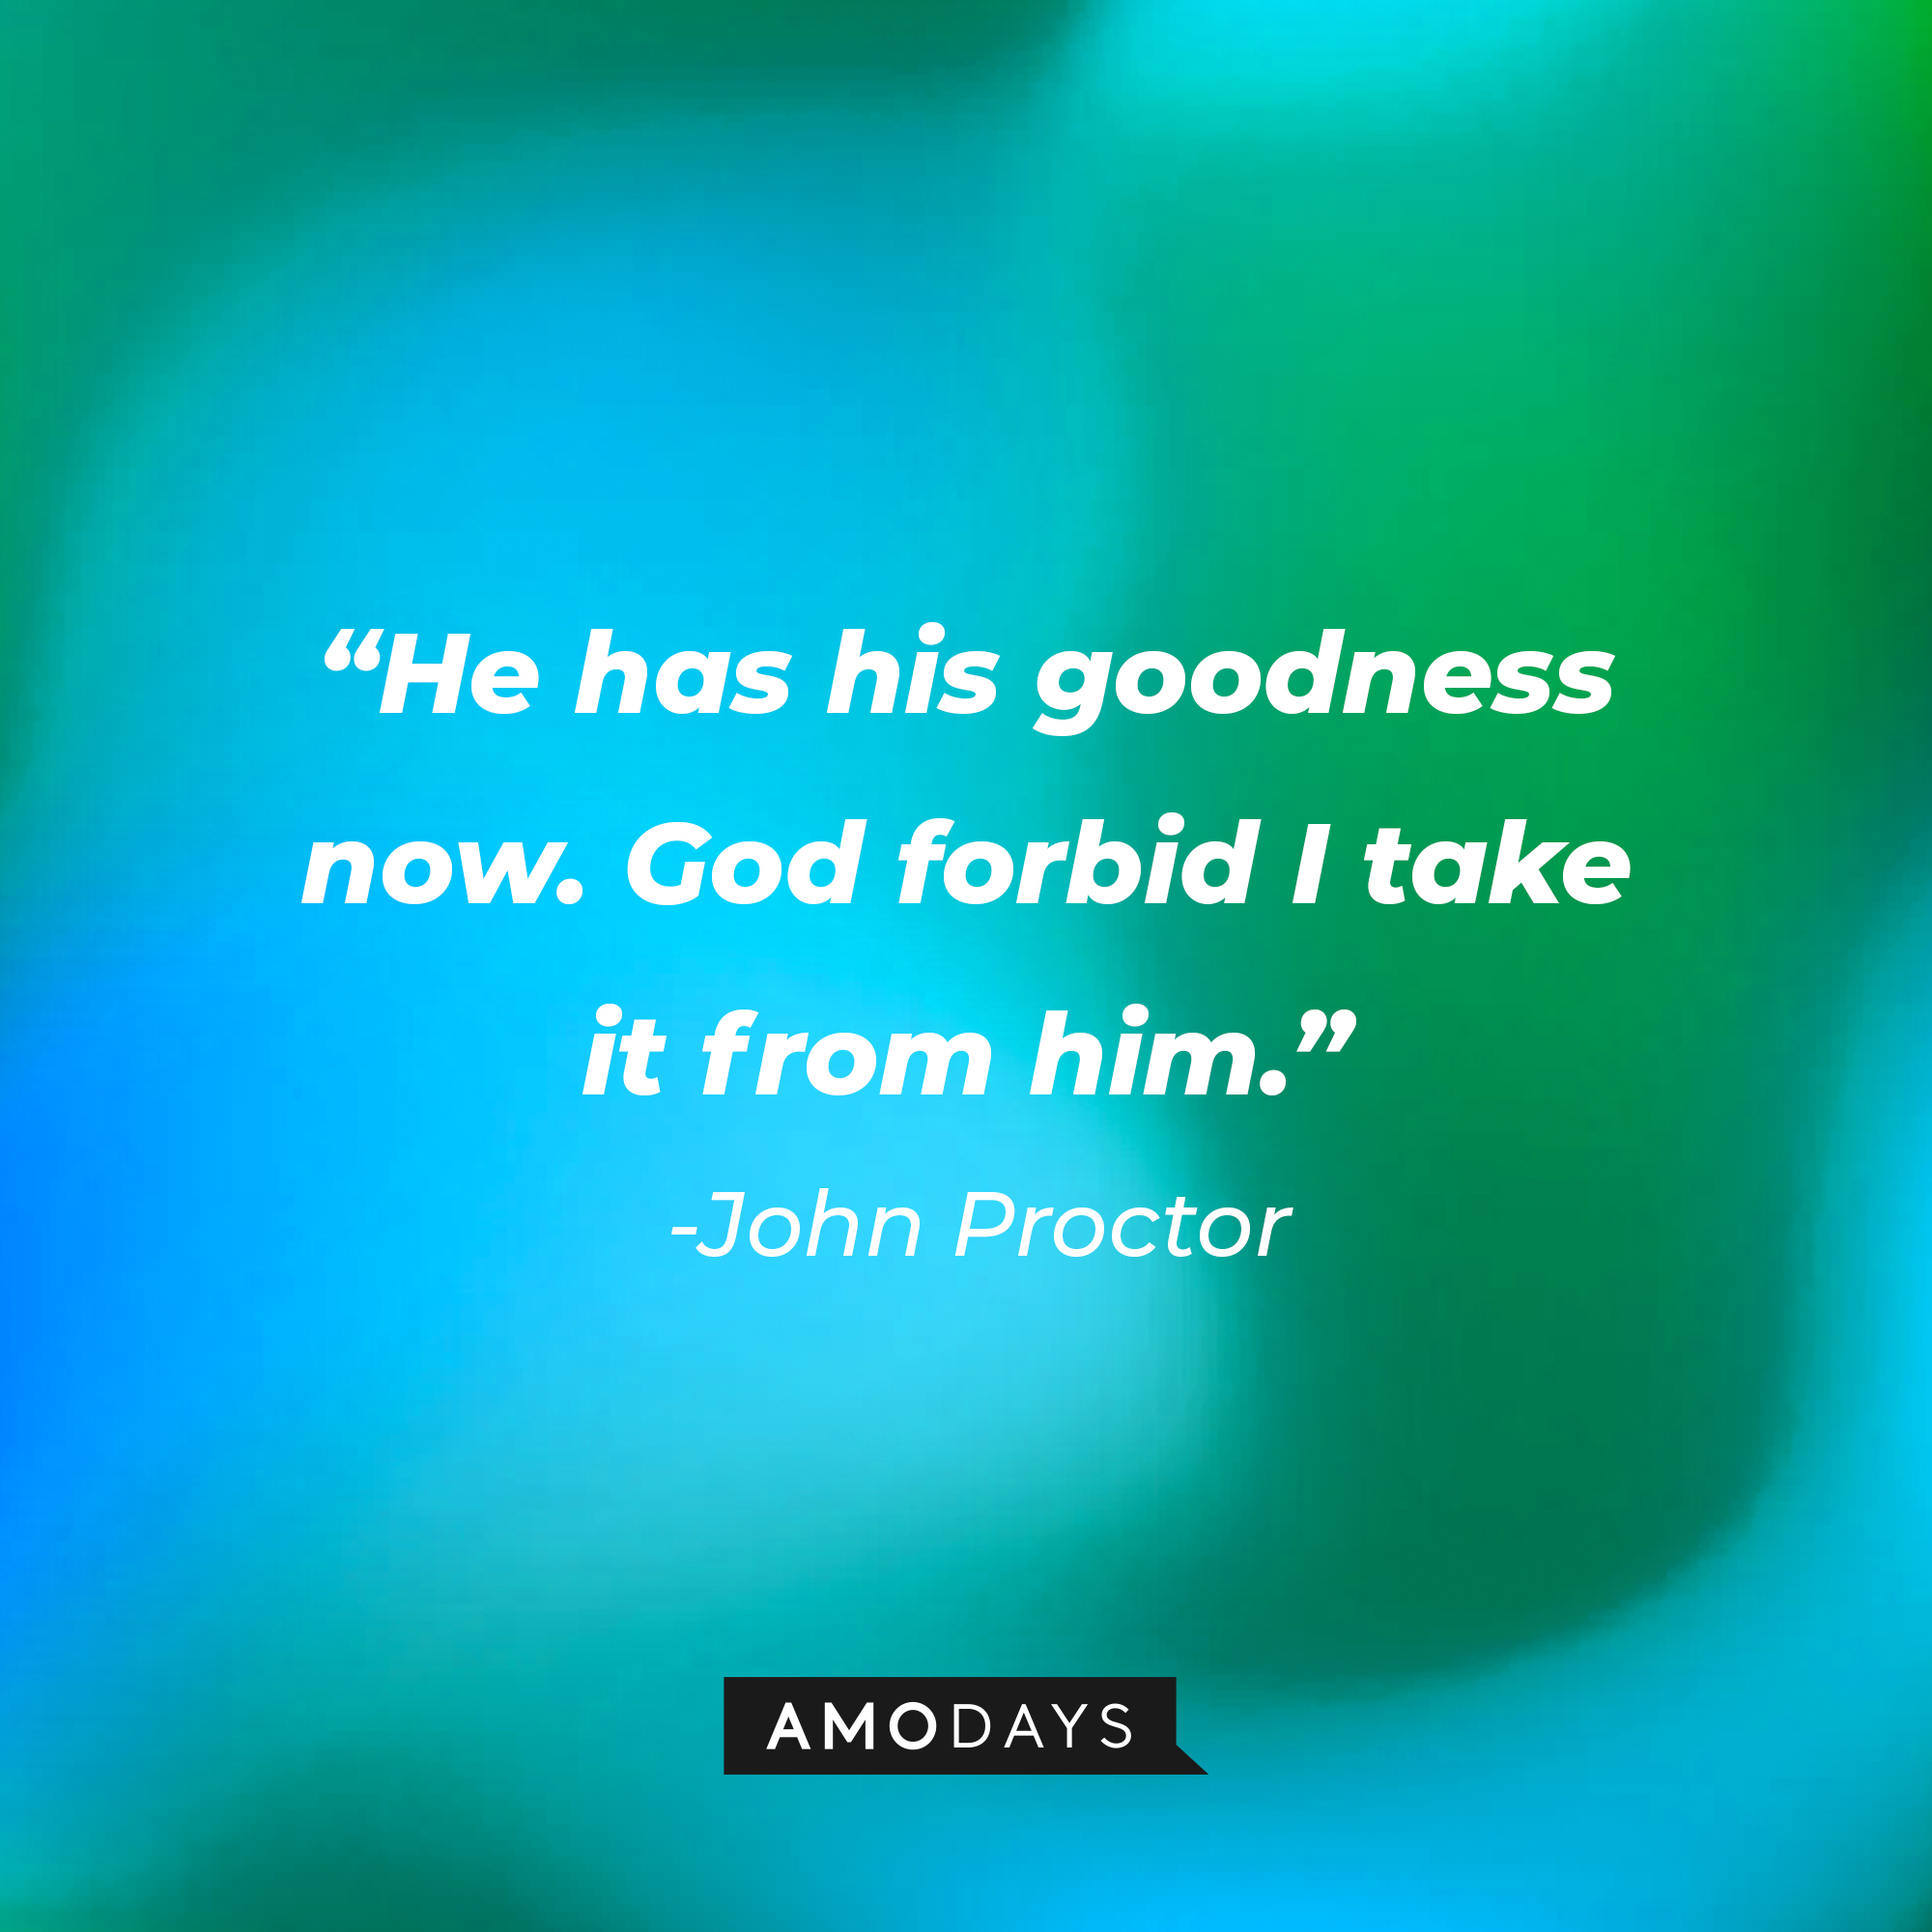 John Proctor's quote: "He has his goodness now. God forbid I take it from him." | Image: AmoDays